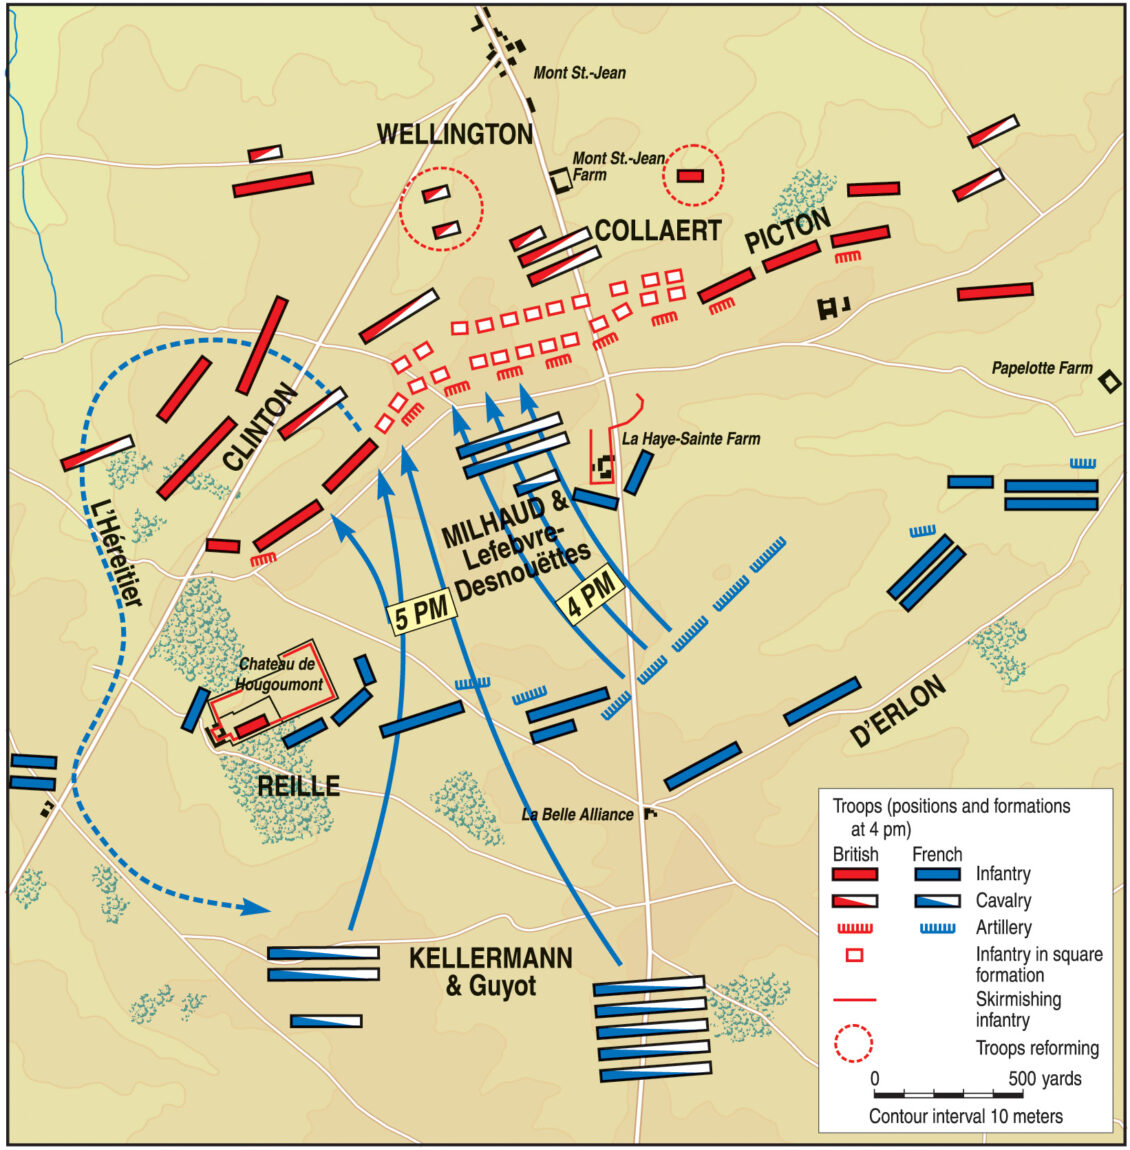 Field Marshal Wellington's battered and frayed center received relief late in the day when the arrival of the Prussian I Corps enabled Wellington to shift his forces to prevent his line from breaking. Fifteen minutes after the Prussians arrived, the French Imperial Guard swept forward.